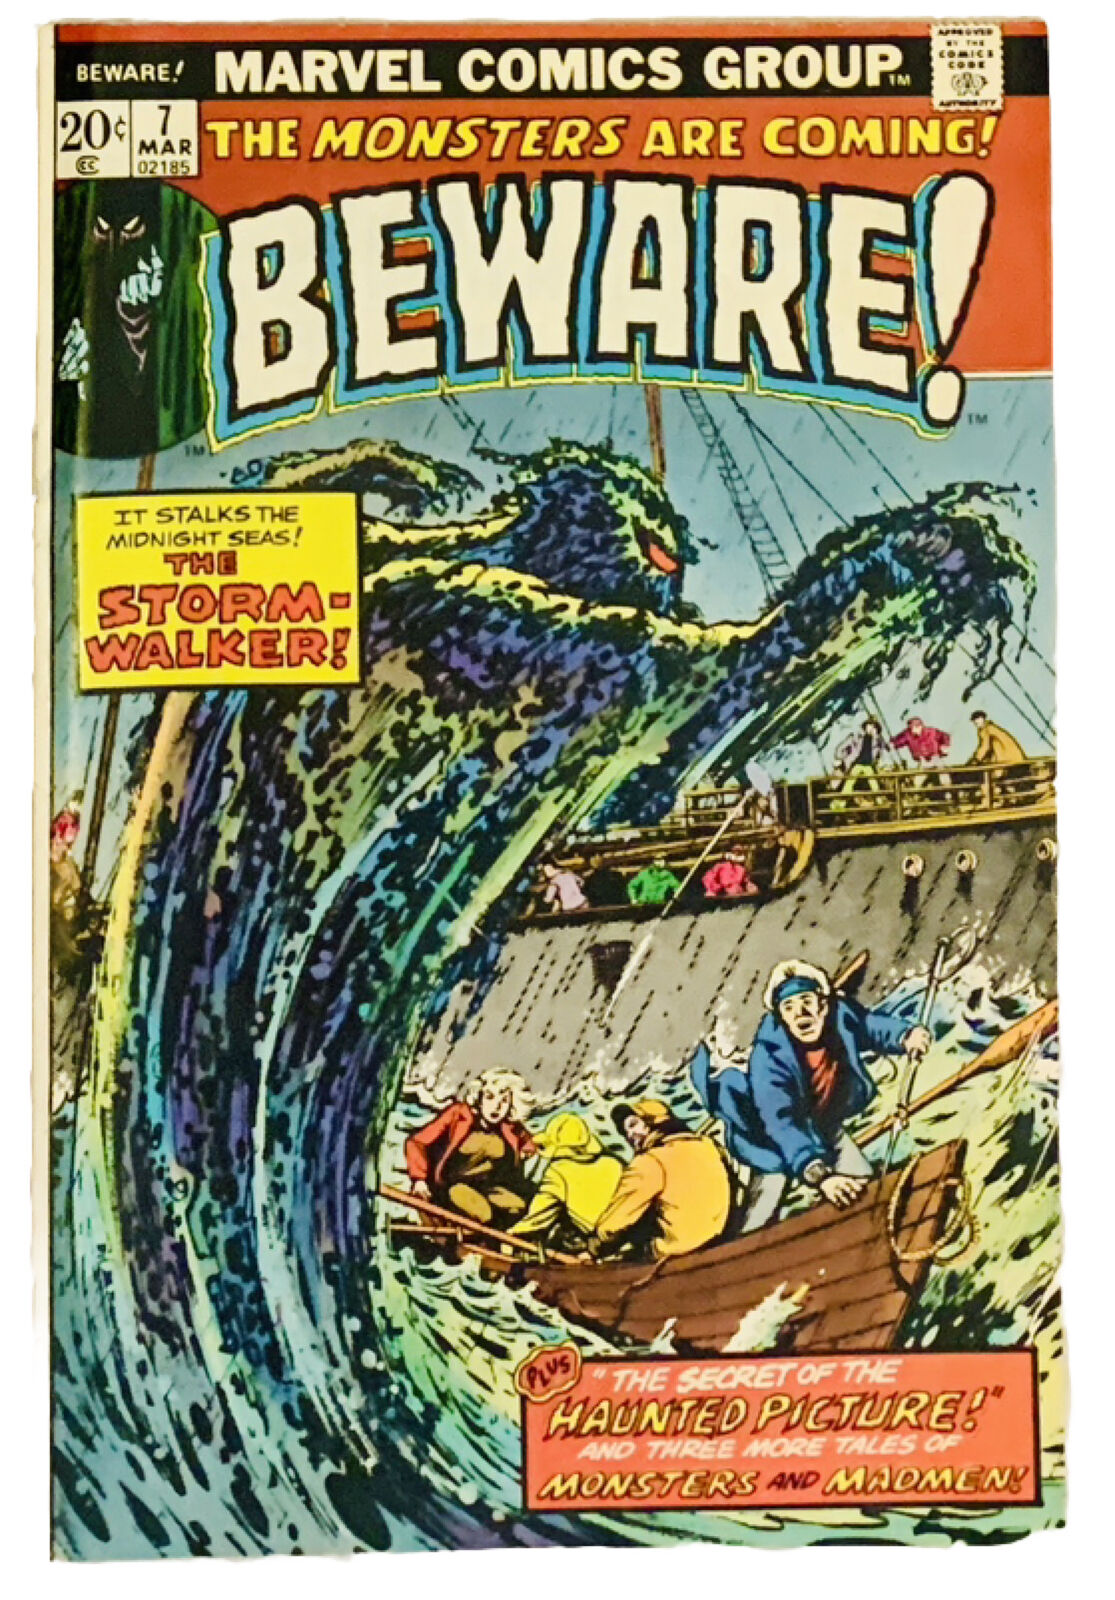 BEWARE #7 The Monsters are Coming Marvel Comic Book March 1963